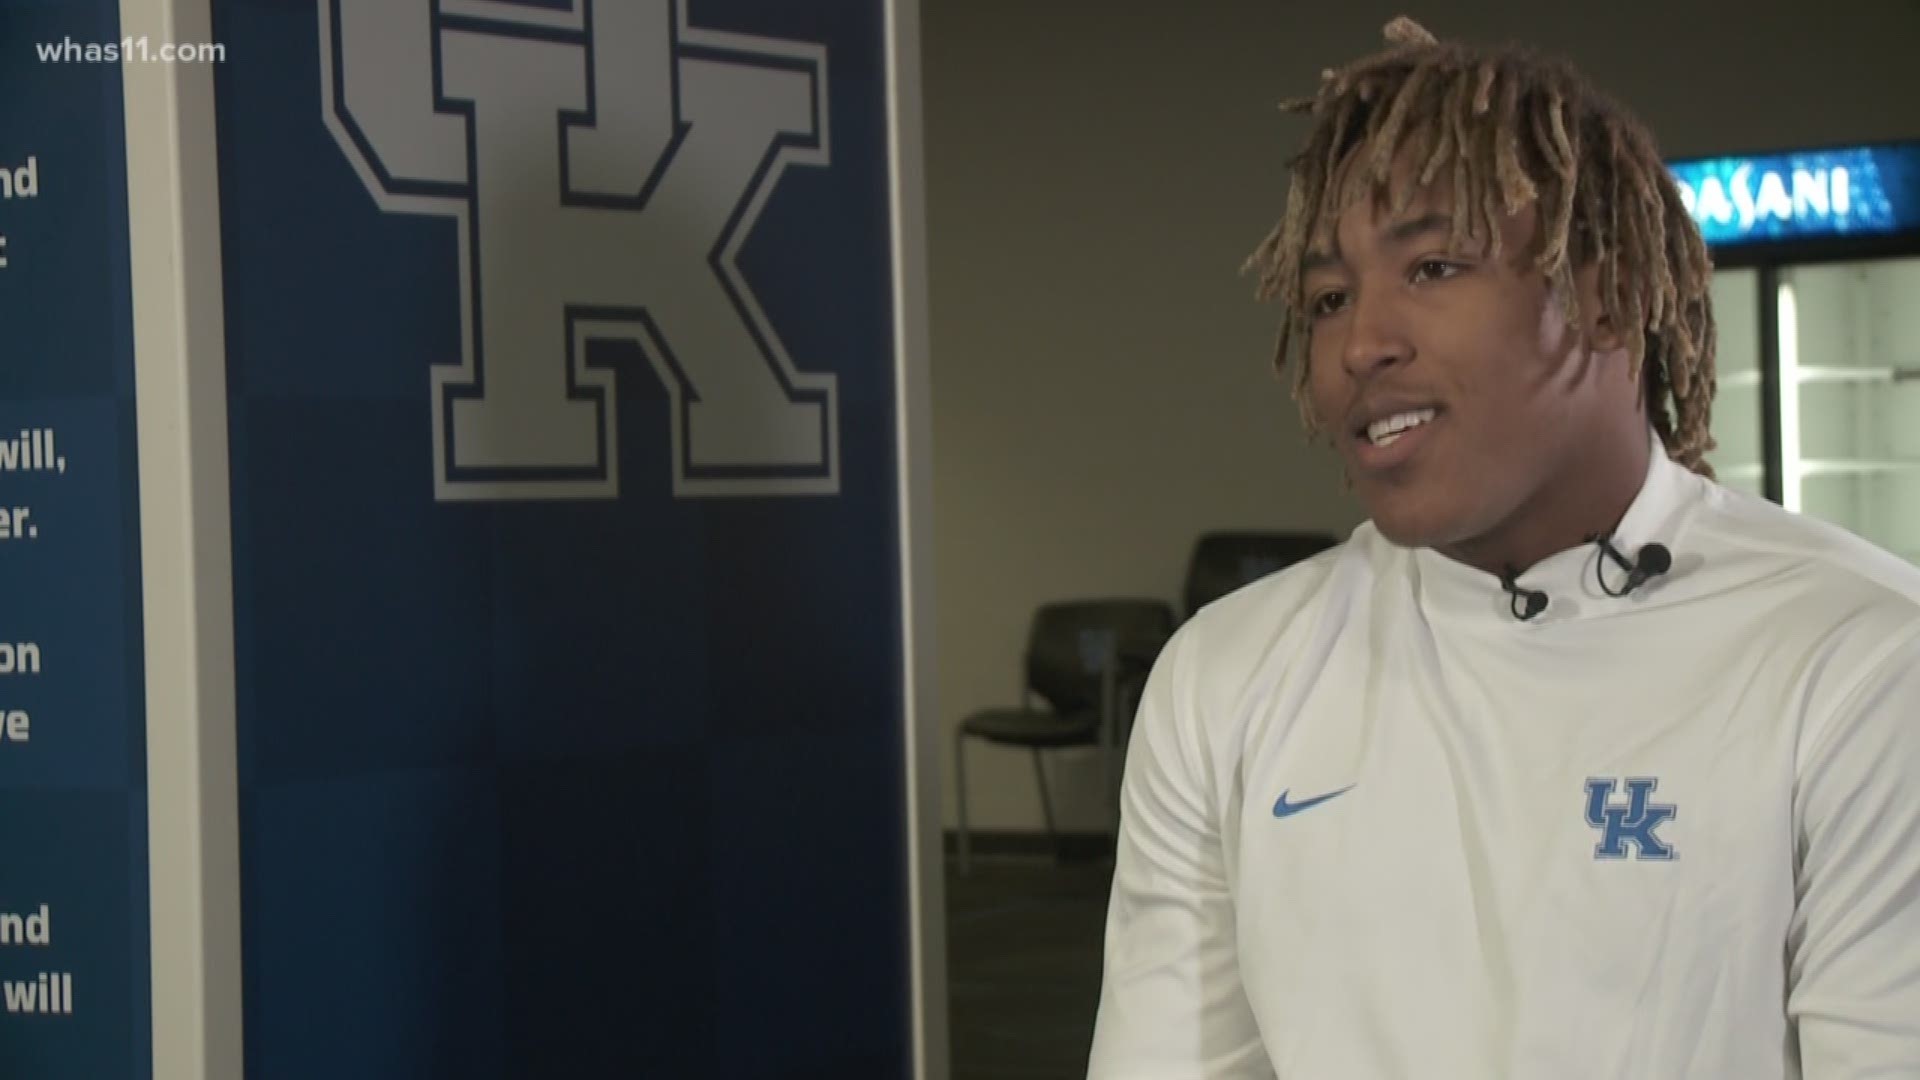 Junior runningback Benny Snell has already declared for the NFL draft, but he's still giving Big Blue Nation his all for his final game as a Wildcat